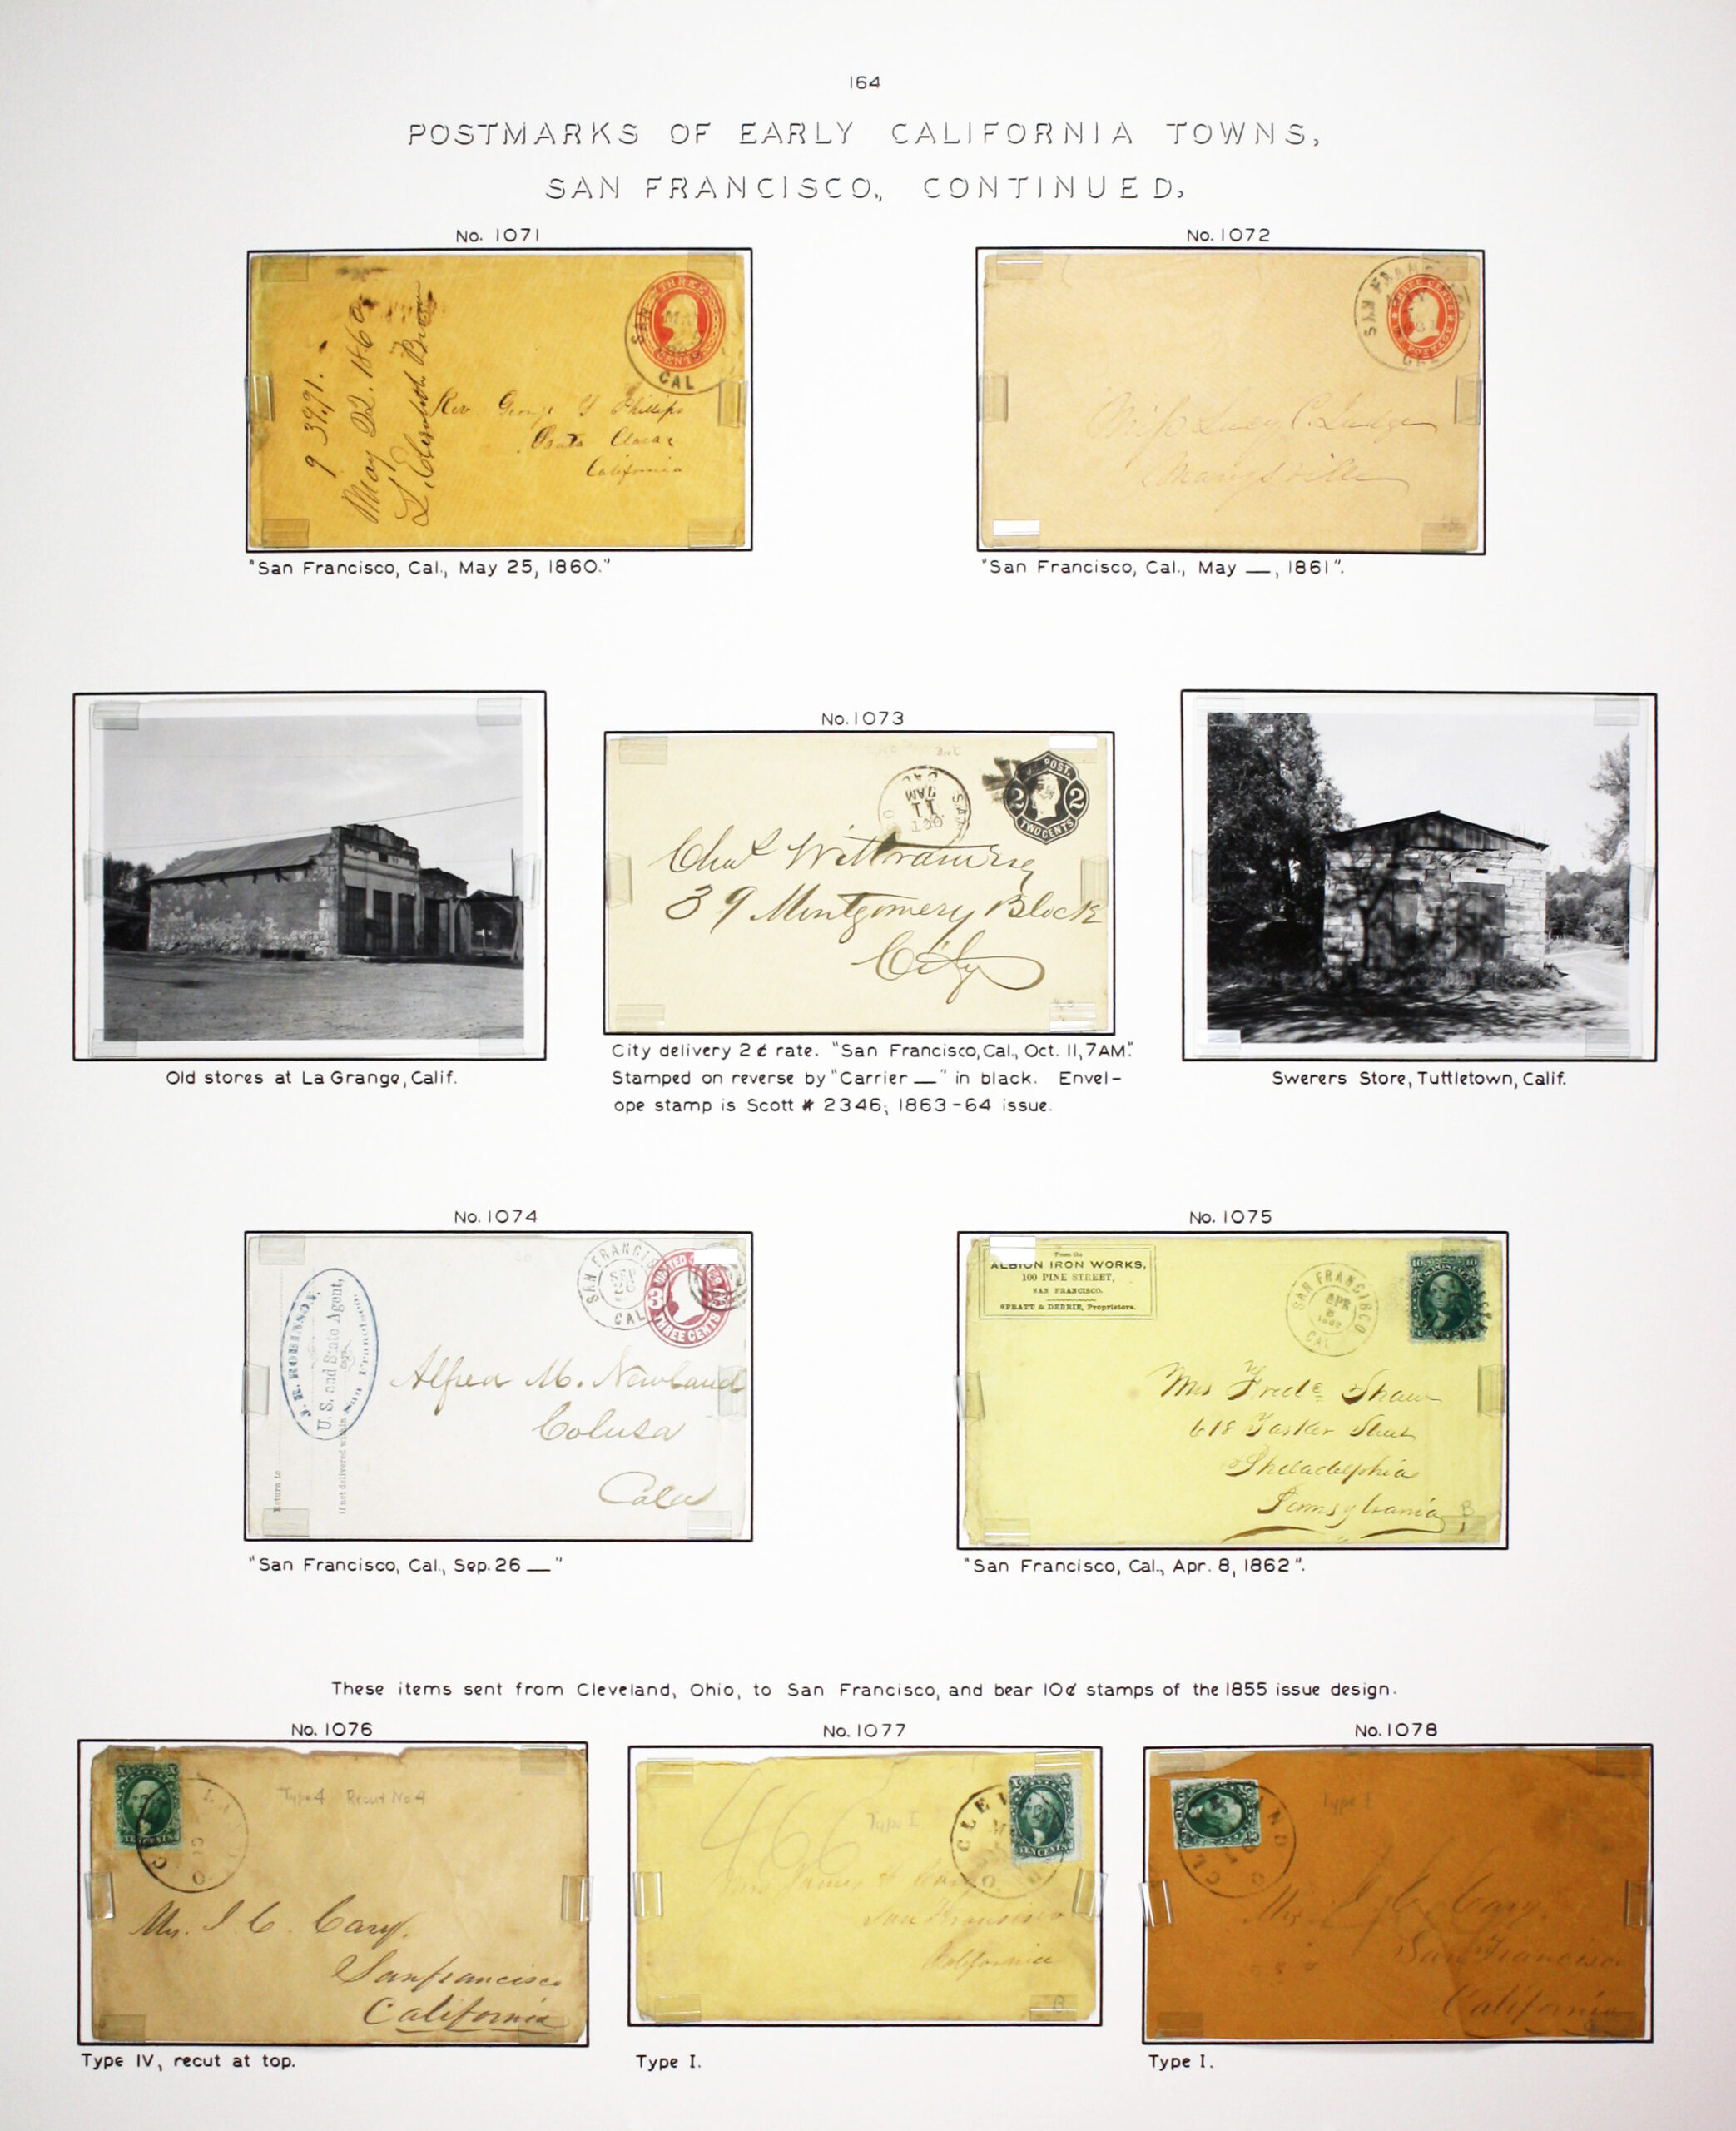 Historic exhibit Panel #164 featuring letter covers and two photographs. Long descriptions are available as page content. Image link will enlarge image.